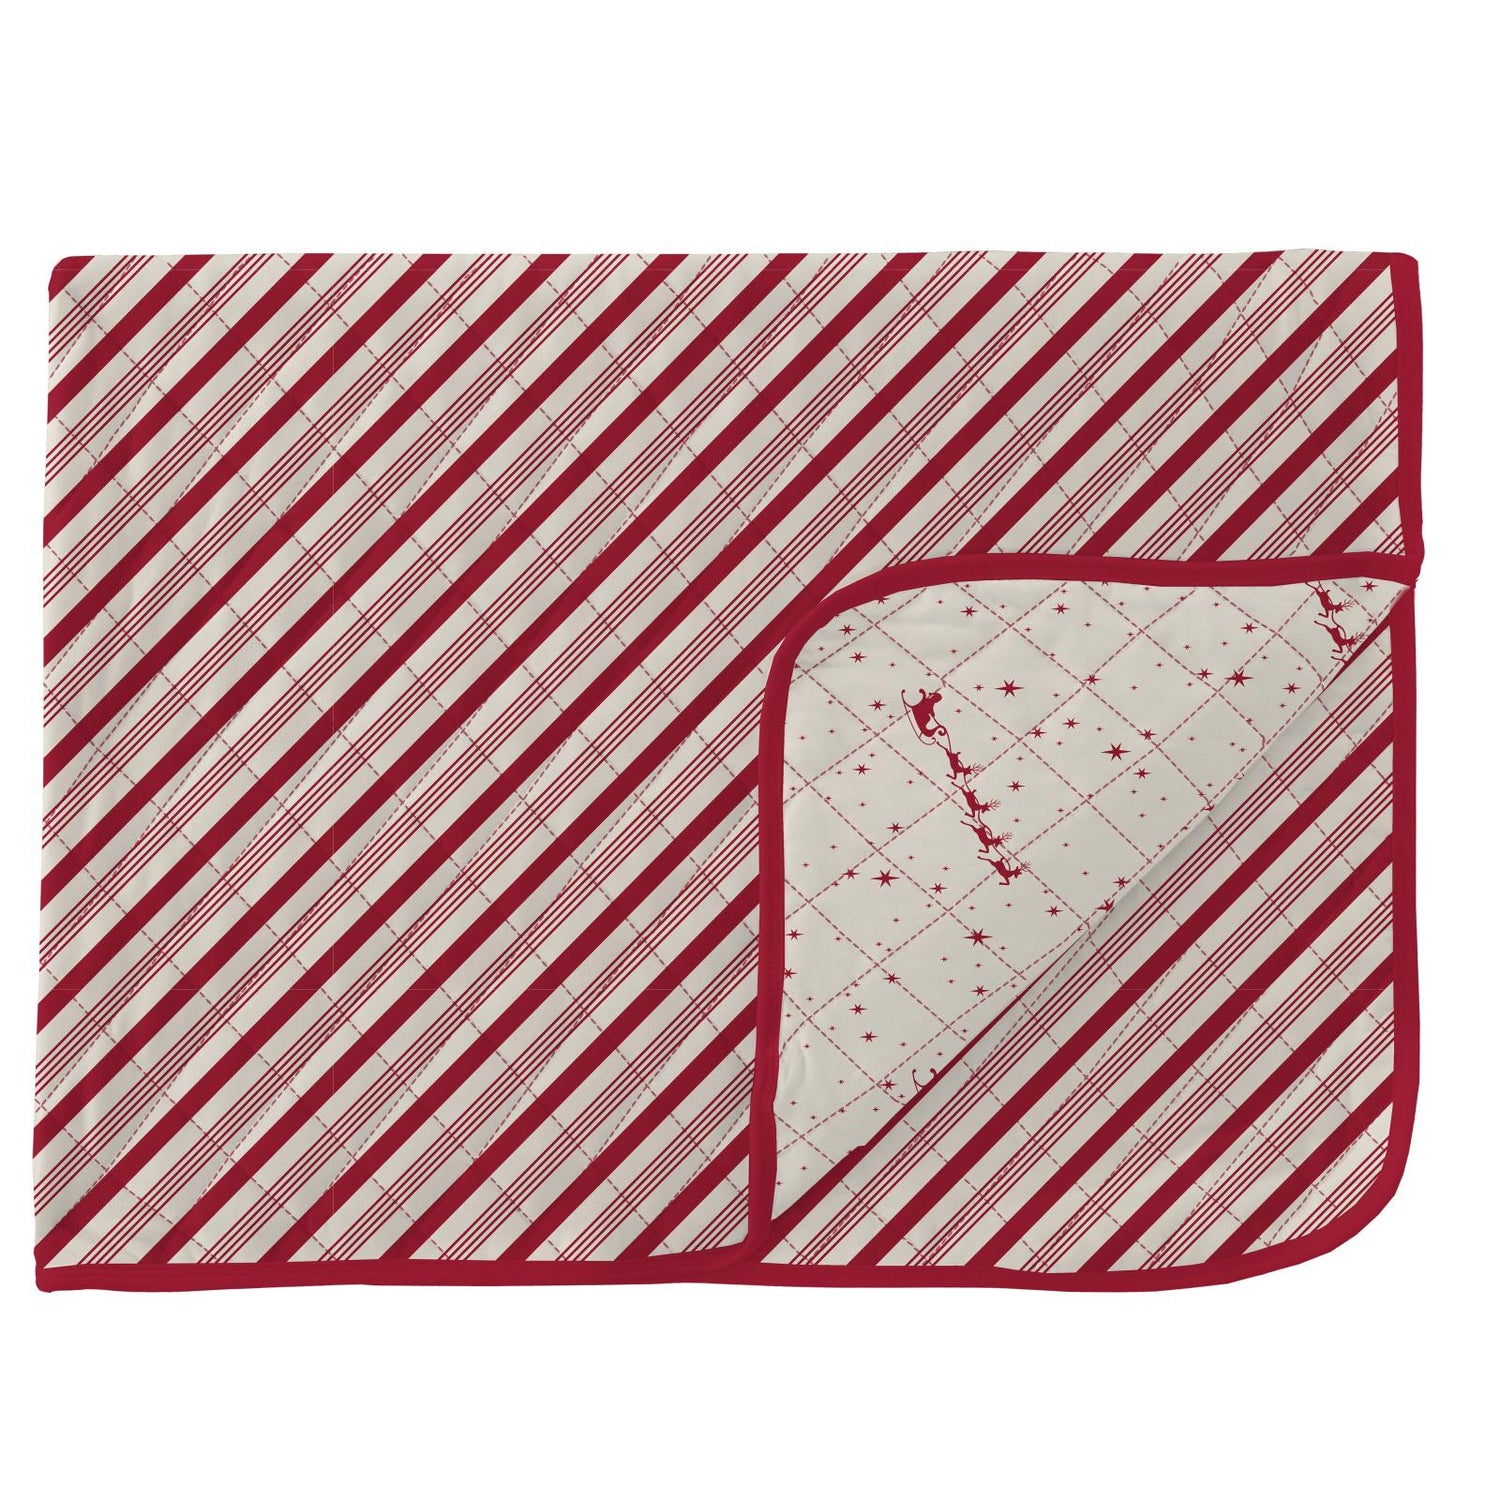 Print Quilted Throw Blanket in Crimson Candy Cane Stripe/Natural Flying Santa